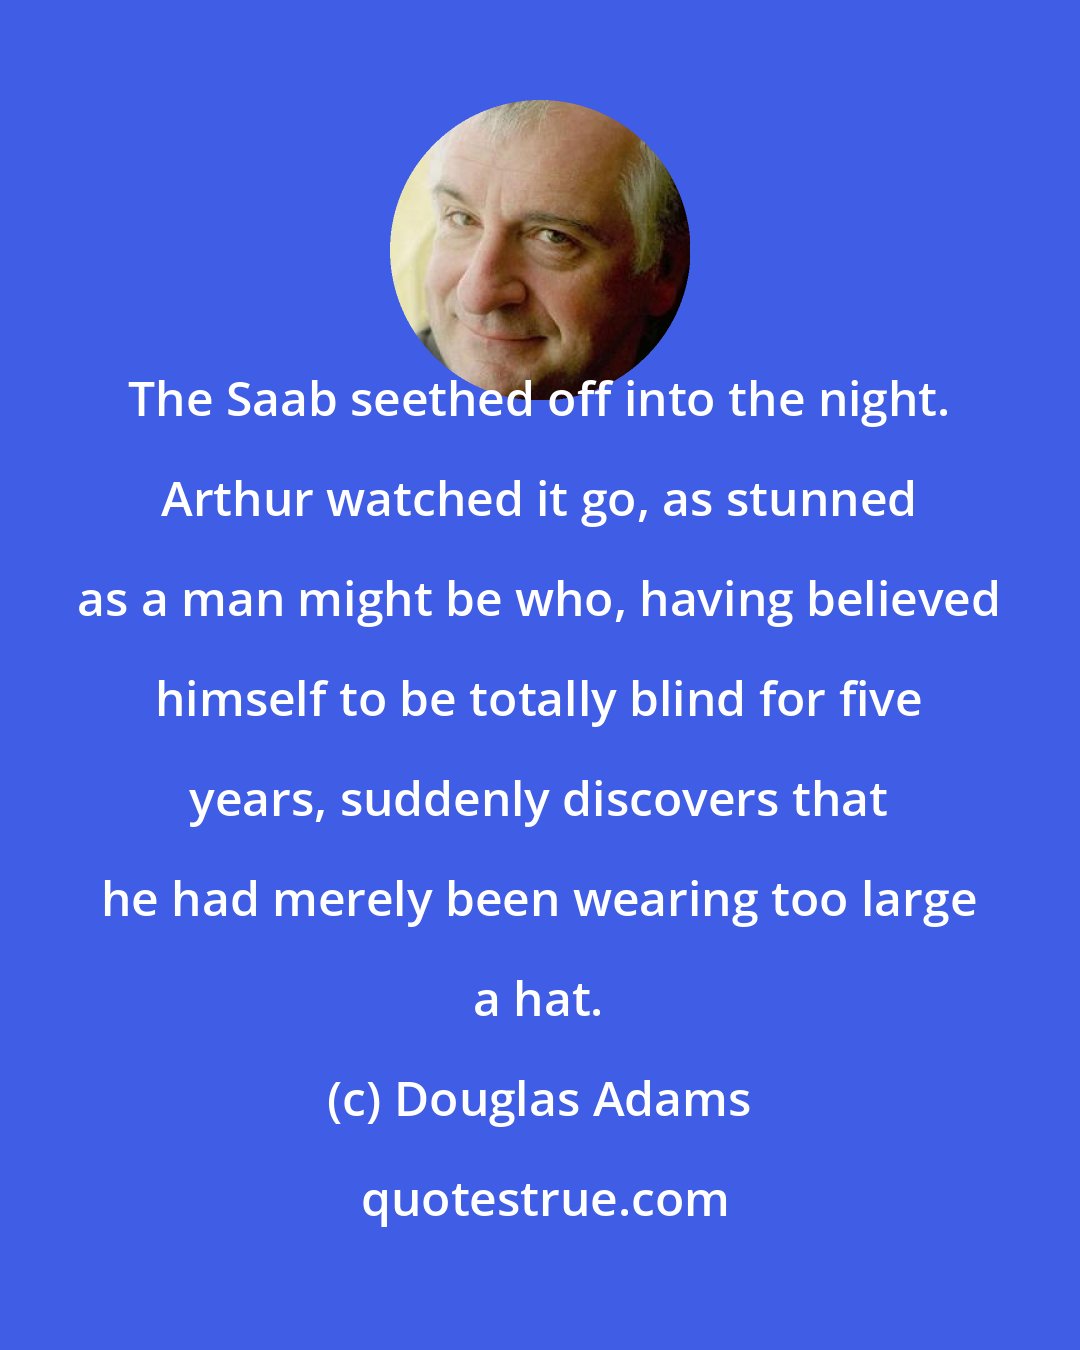 Douglas Adams: The Saab seethed off into the night. Arthur watched it go, as stunned as a man might be who, having believed himself to be totally blind for five years, suddenly discovers that he had merely been wearing too large a hat.